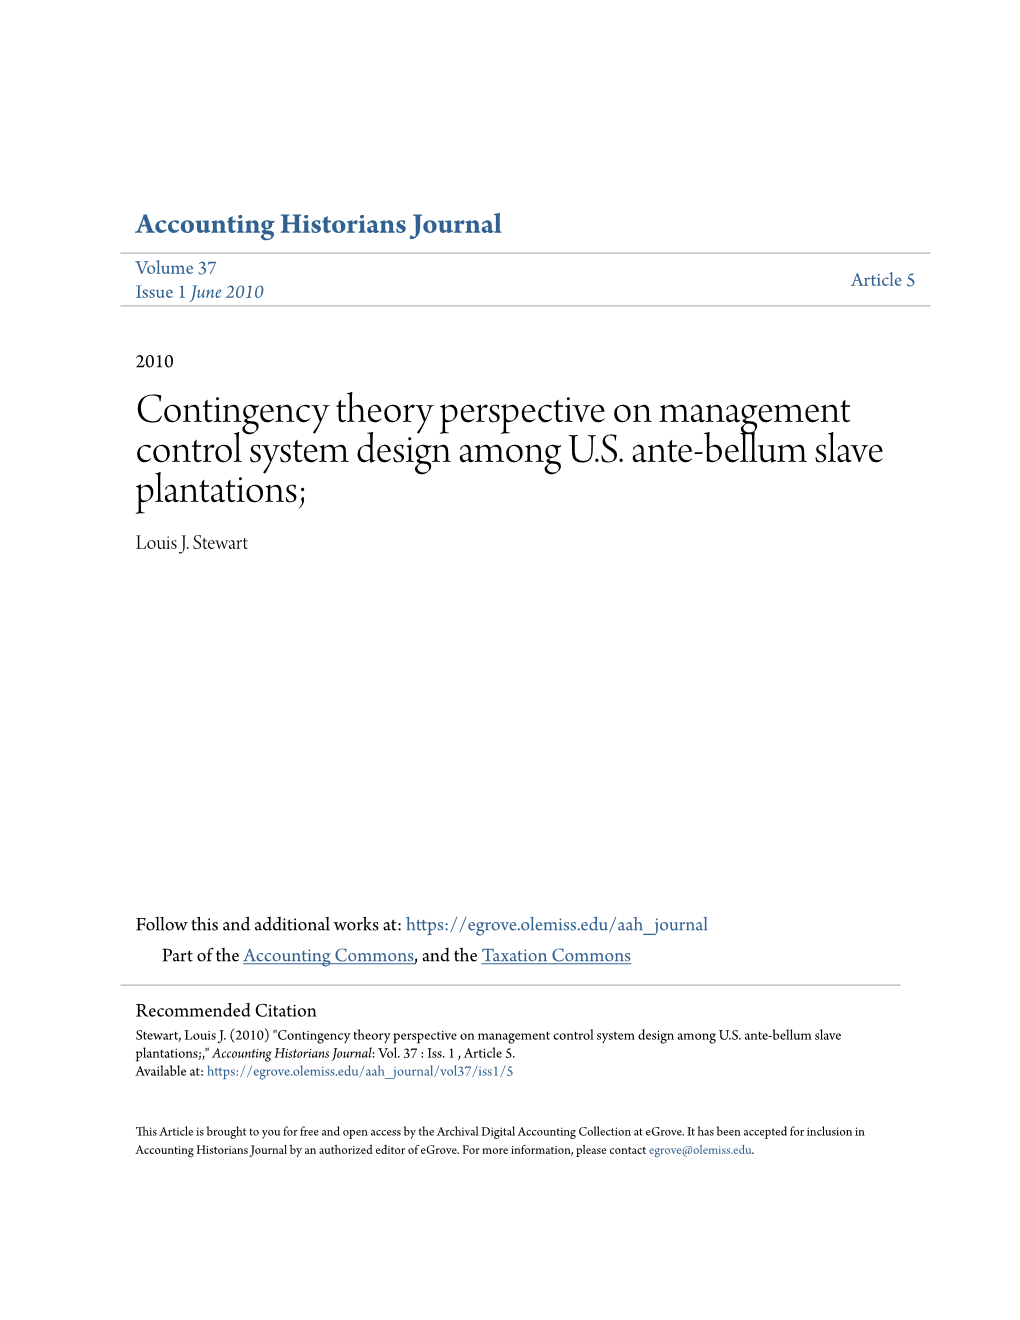 Contingency Theory Perspective on Management Control System Design Among U.S. Ante-Bellum Slave Plantations; Louis J